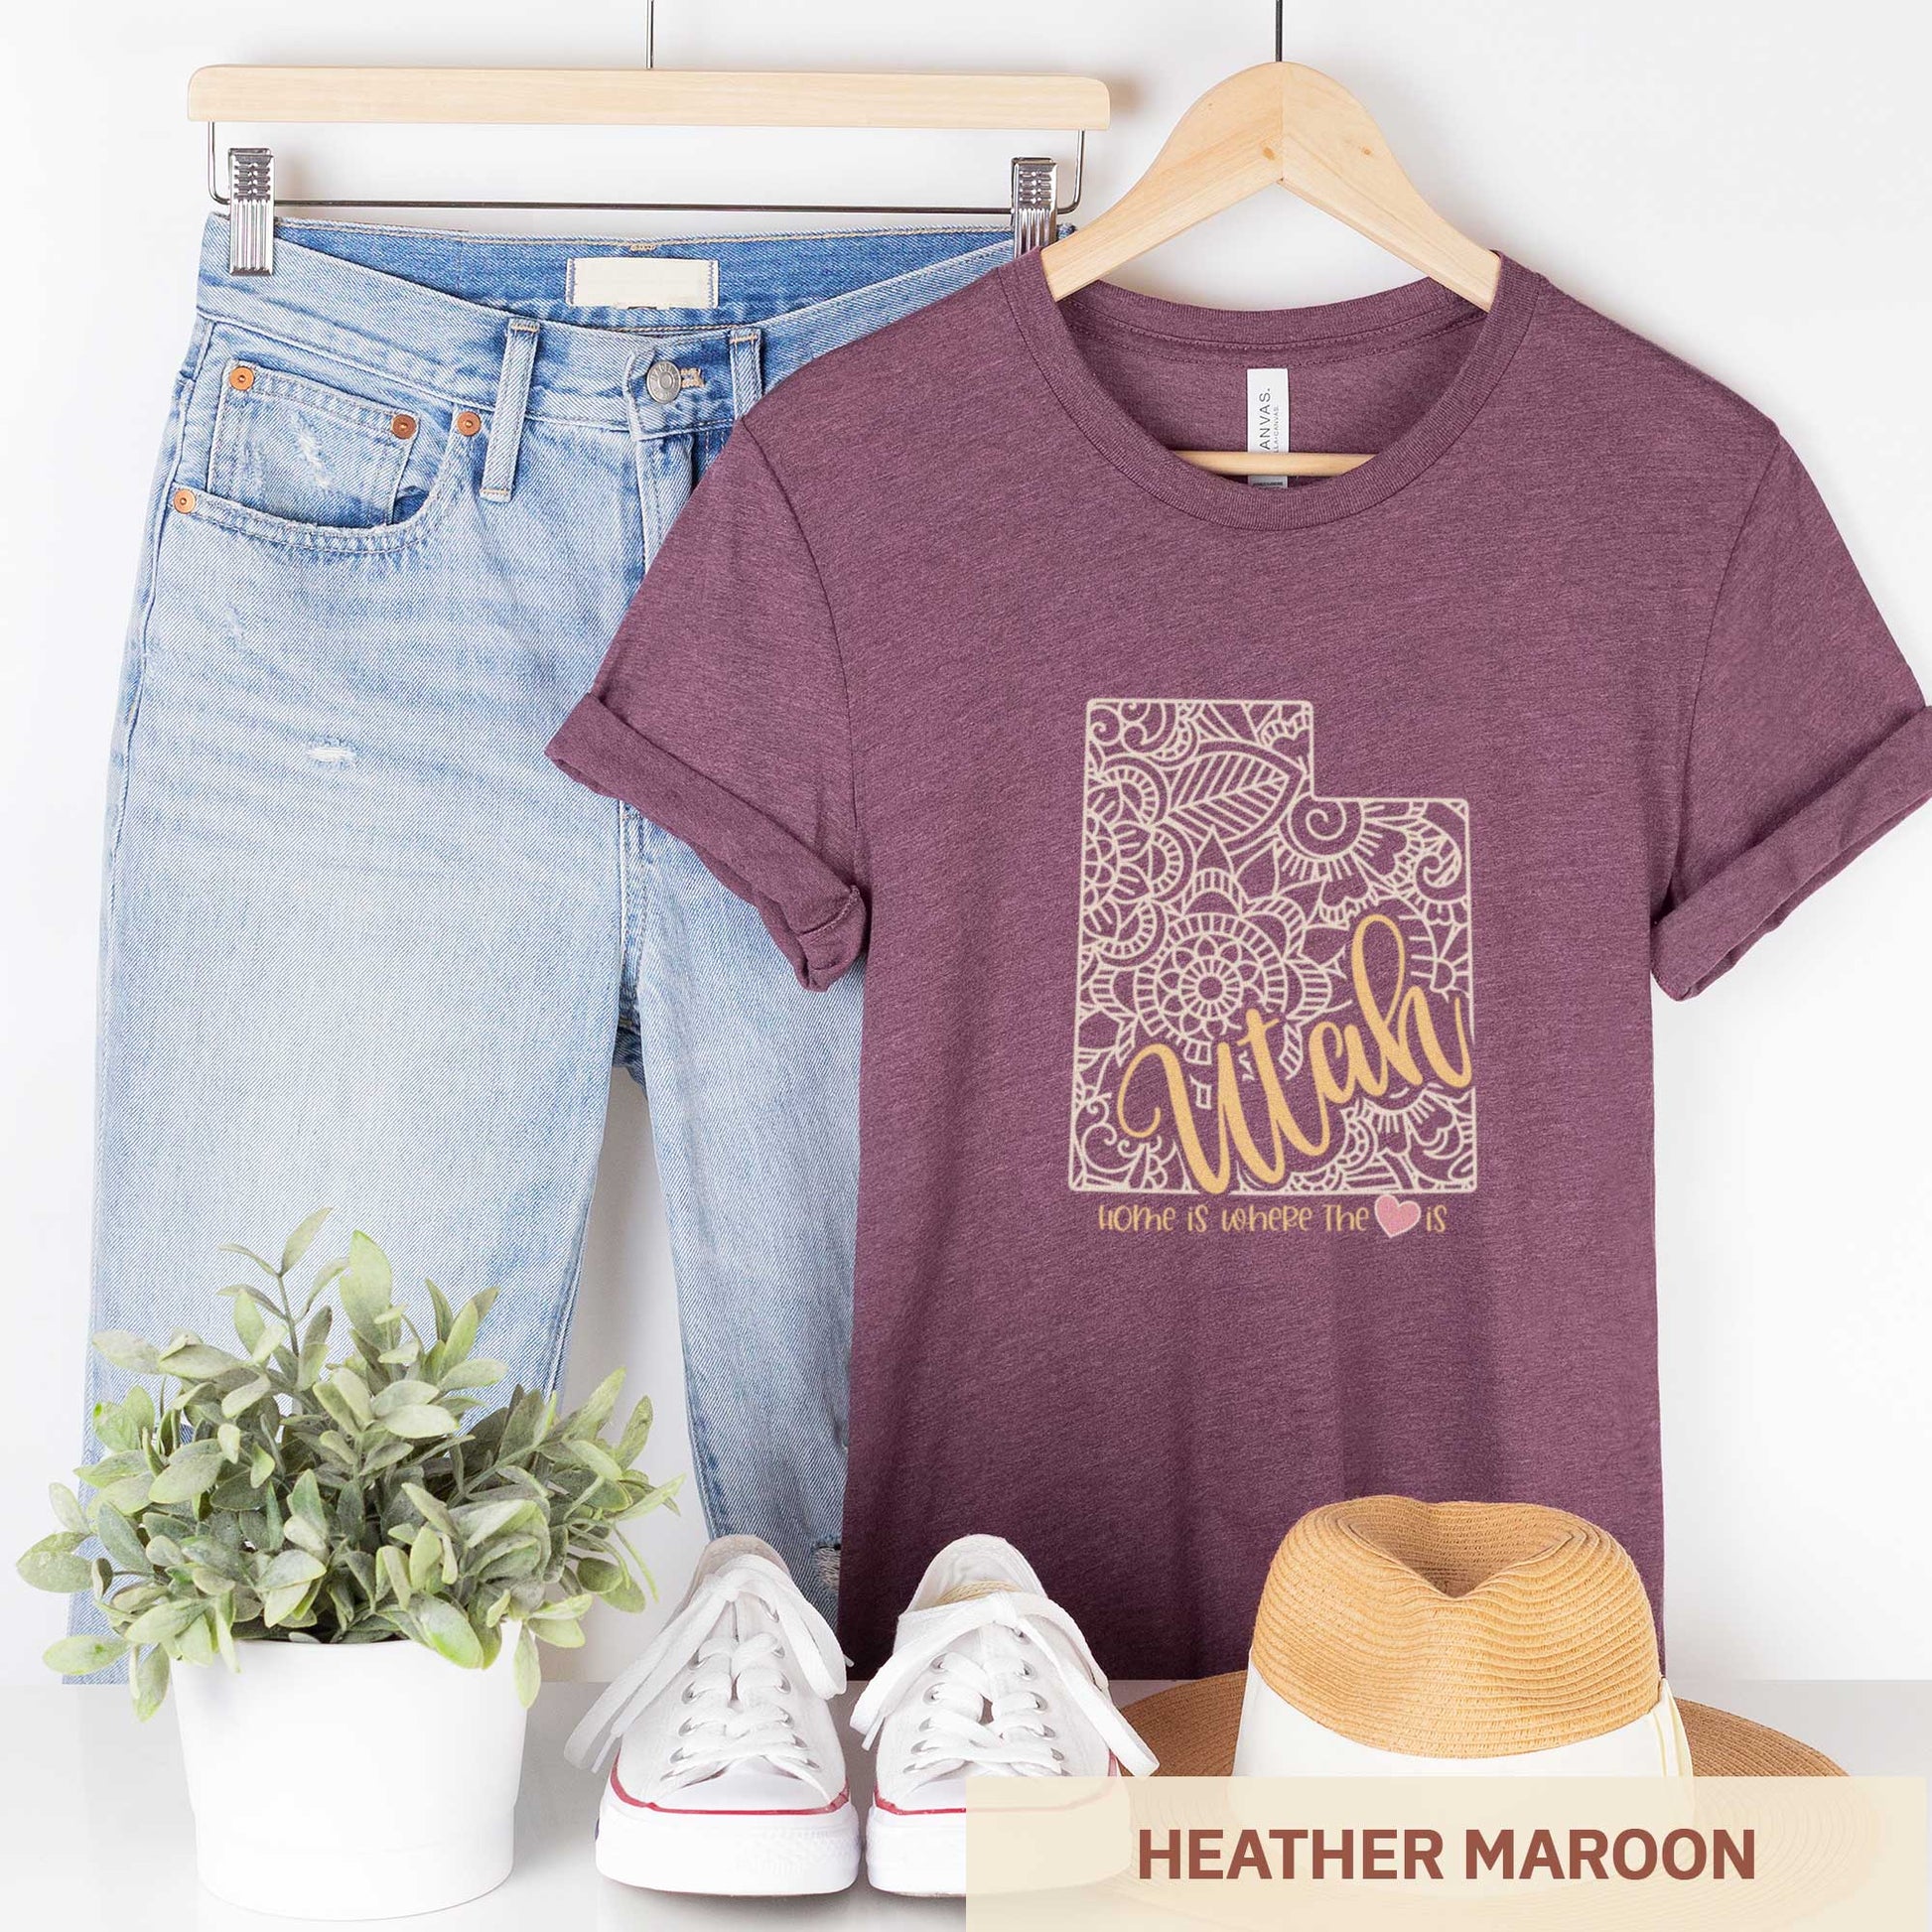 A hanging heather maroon Bella Canvas t-shirt featuring a mandala in the shape of Utah with the words home is where the heart is.